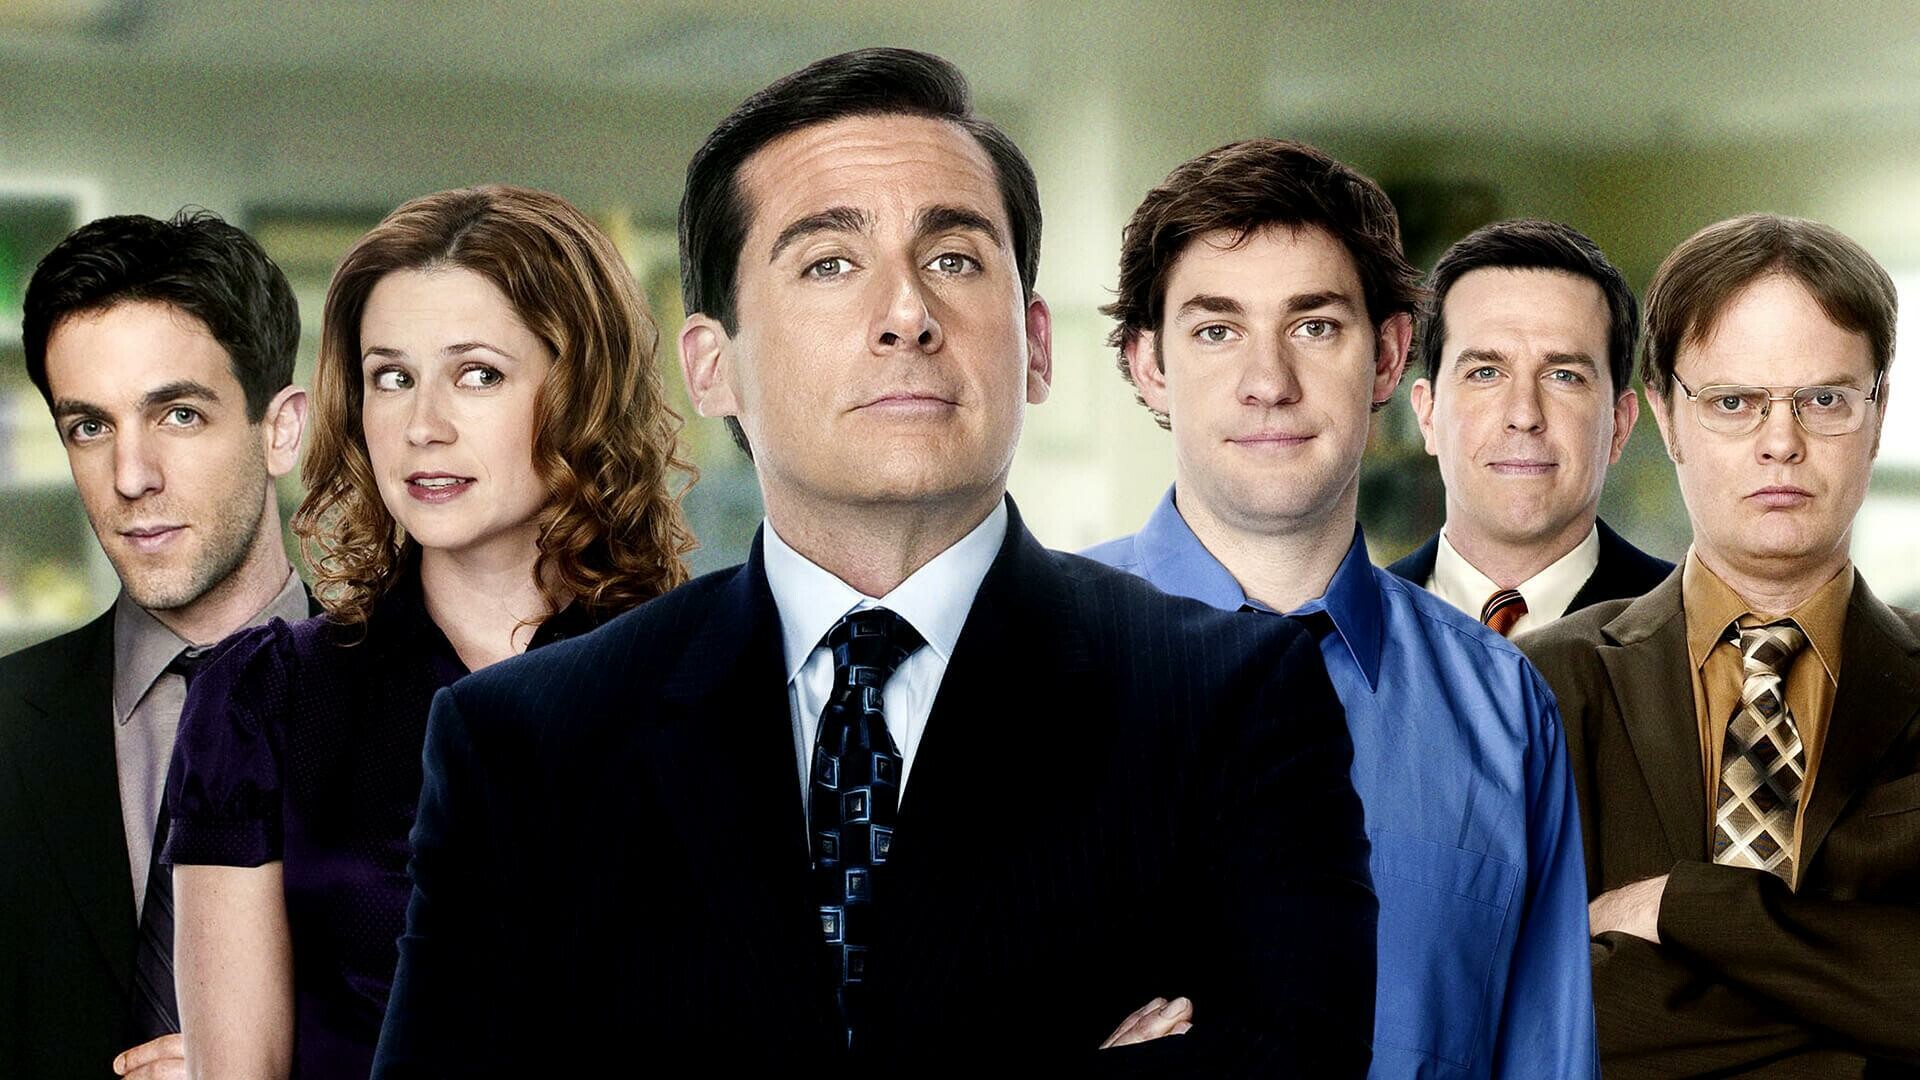 The Office (TV Series): A 21-minute-long sitcom produced by the Deedle-Dee Productions and Reveille Productions. 1920x1080 Full HD Wallpaper.